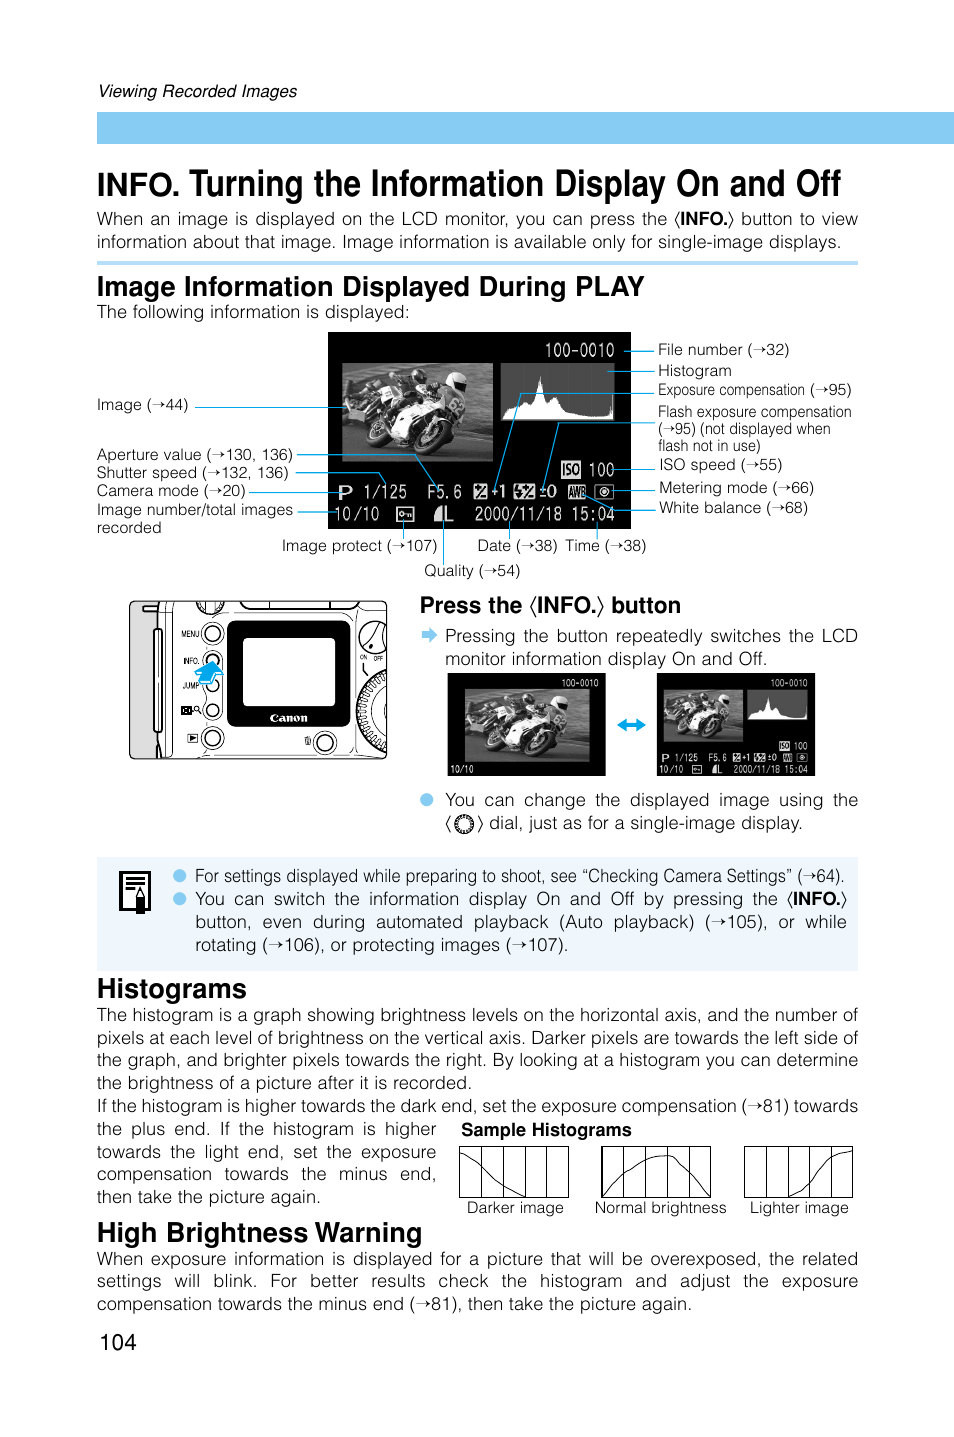 Turning the information display on and off, Info, Image information displayed during play | Histograms, High brightness warning | Canon EOS D30 User Manual | Page 104 / 152